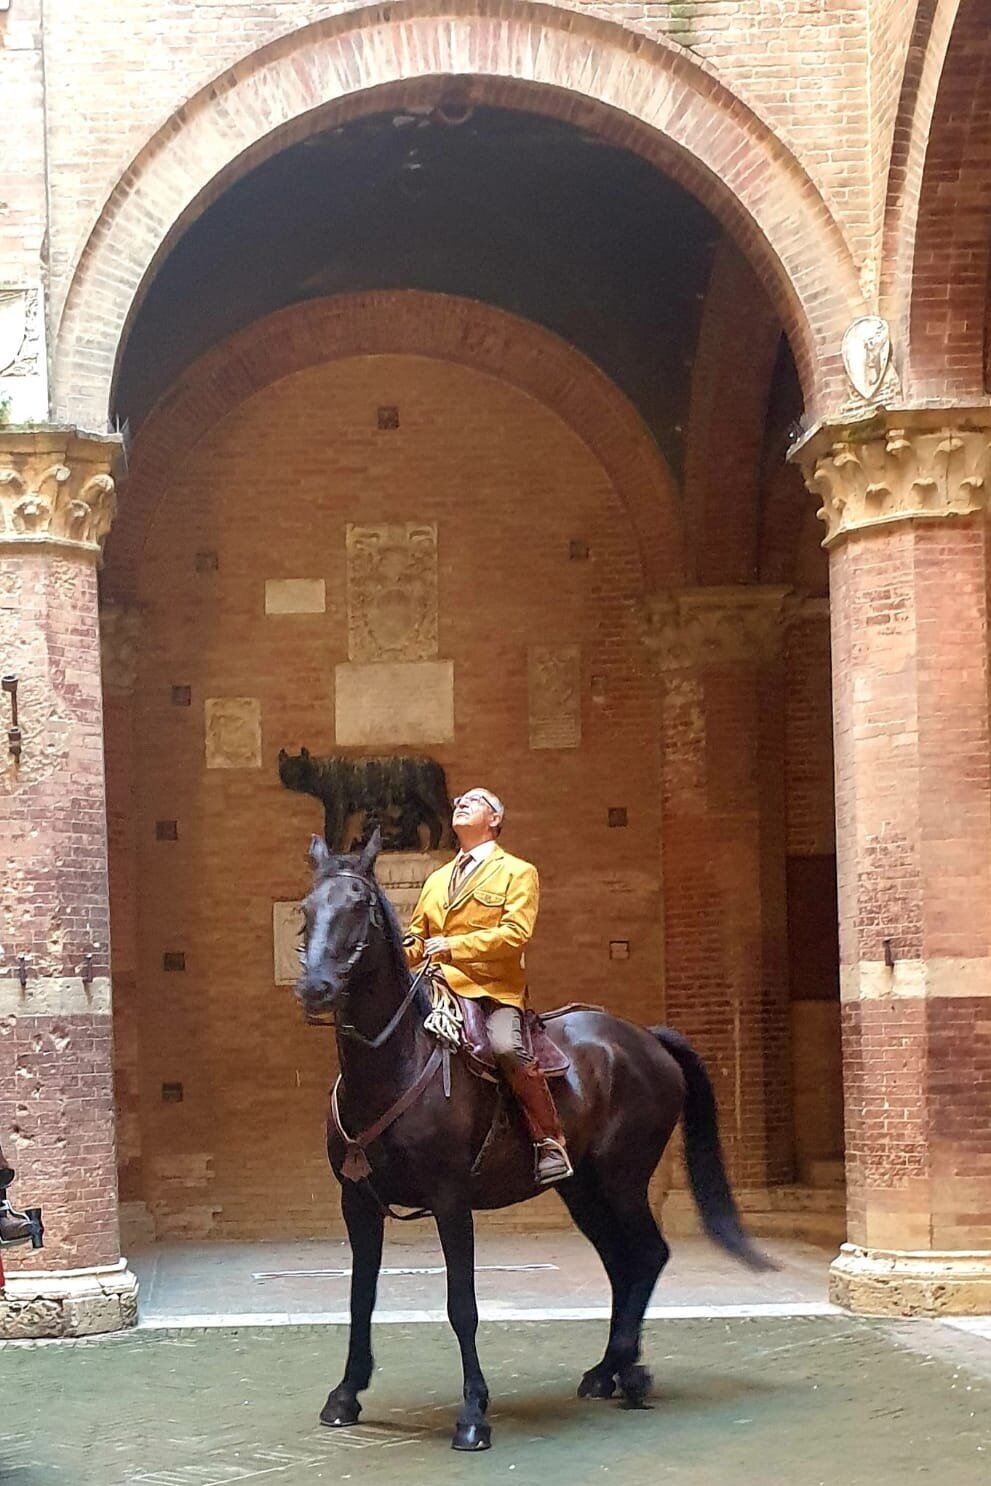 PICTURED: My friend Carlo Barberi, in the colors of a captain of his contrada, preparing to lead his men out into the Piazza del Campo.